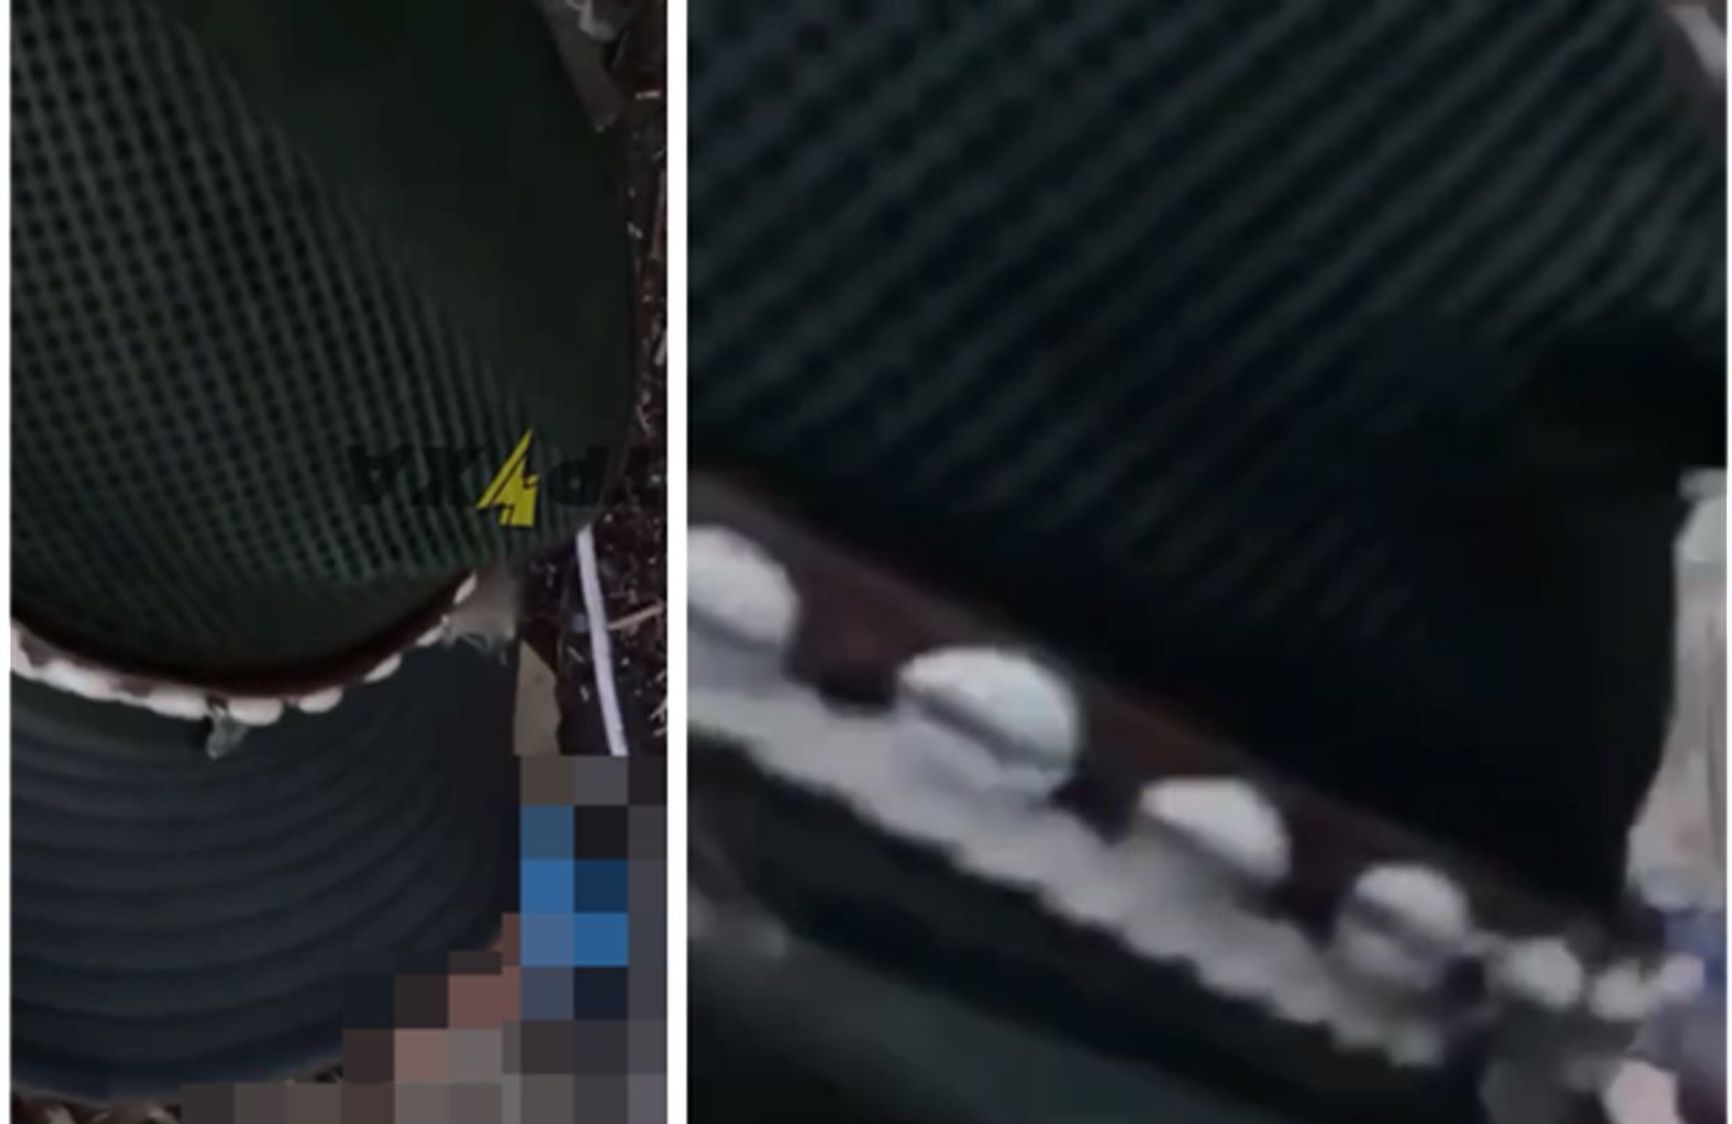 A fragment of the hat caught in the frame in the first video